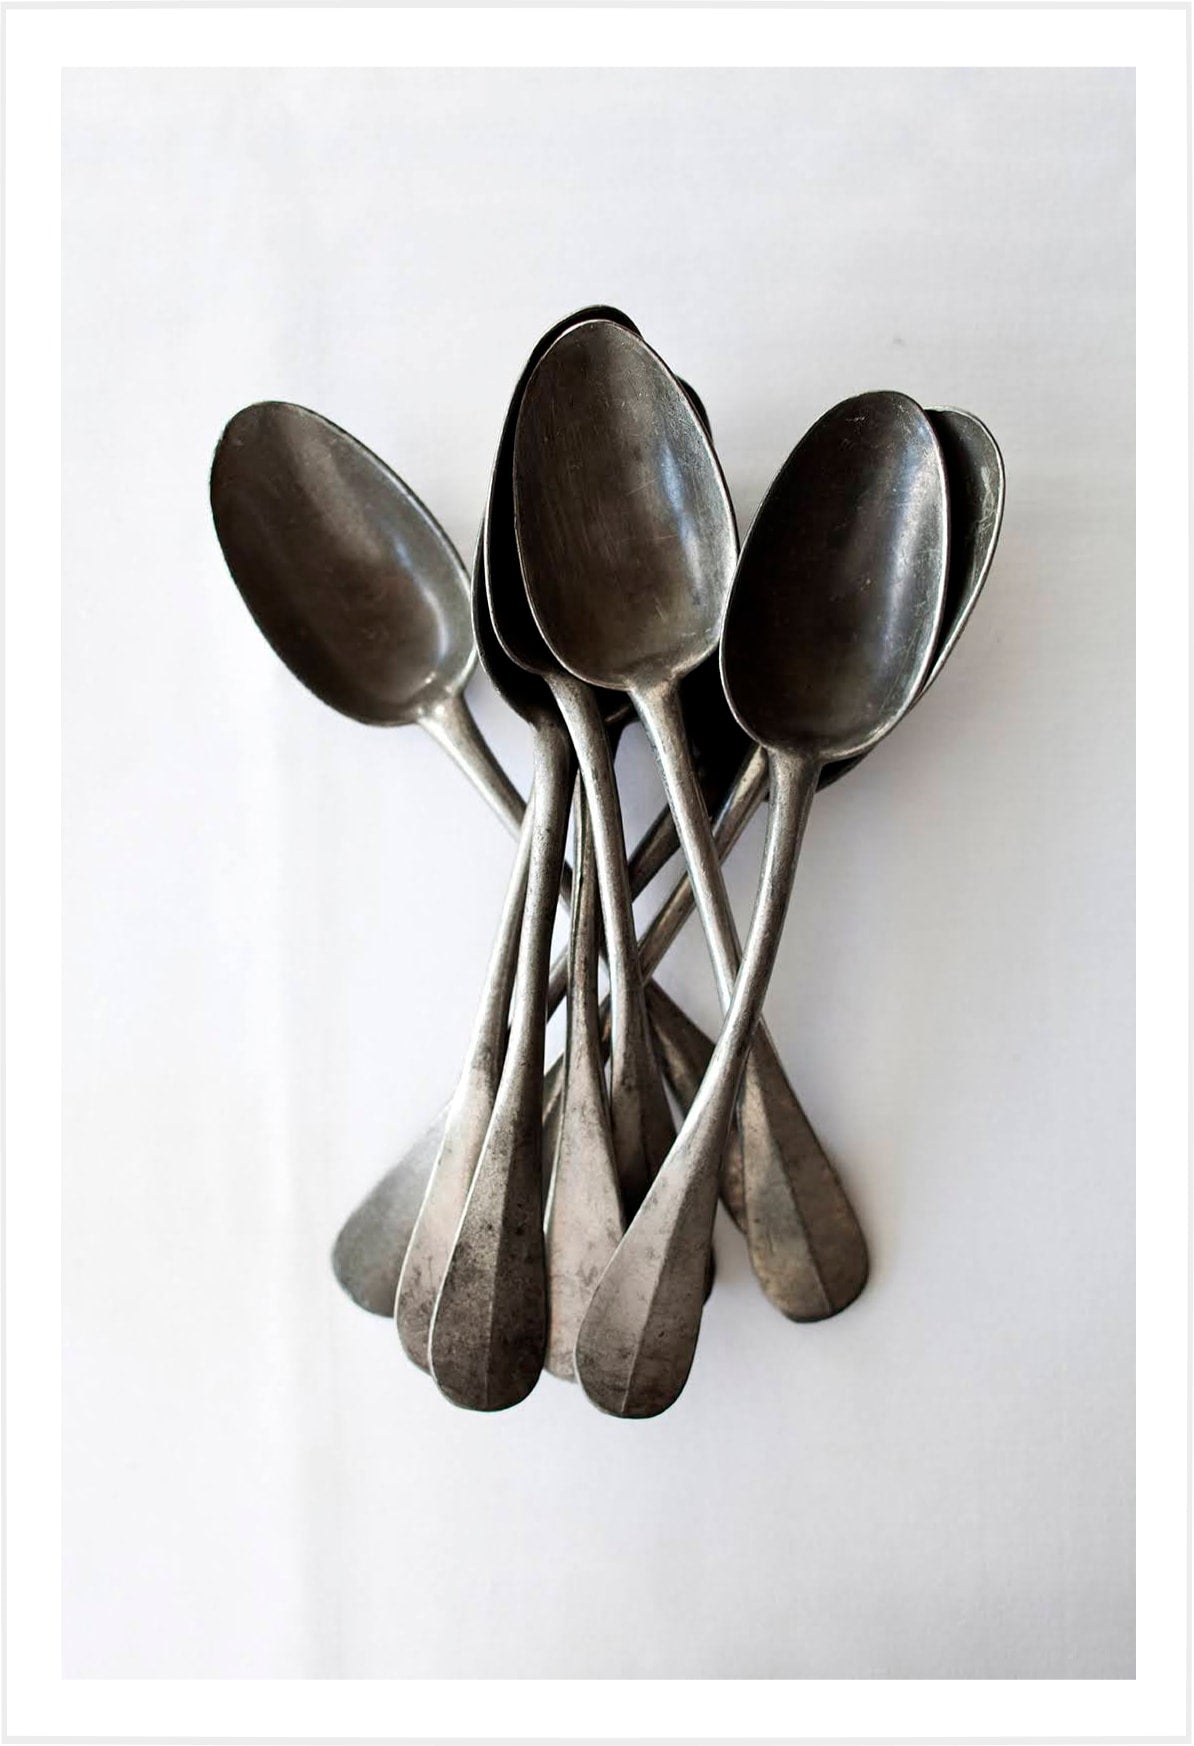 Pewter Spoons #1